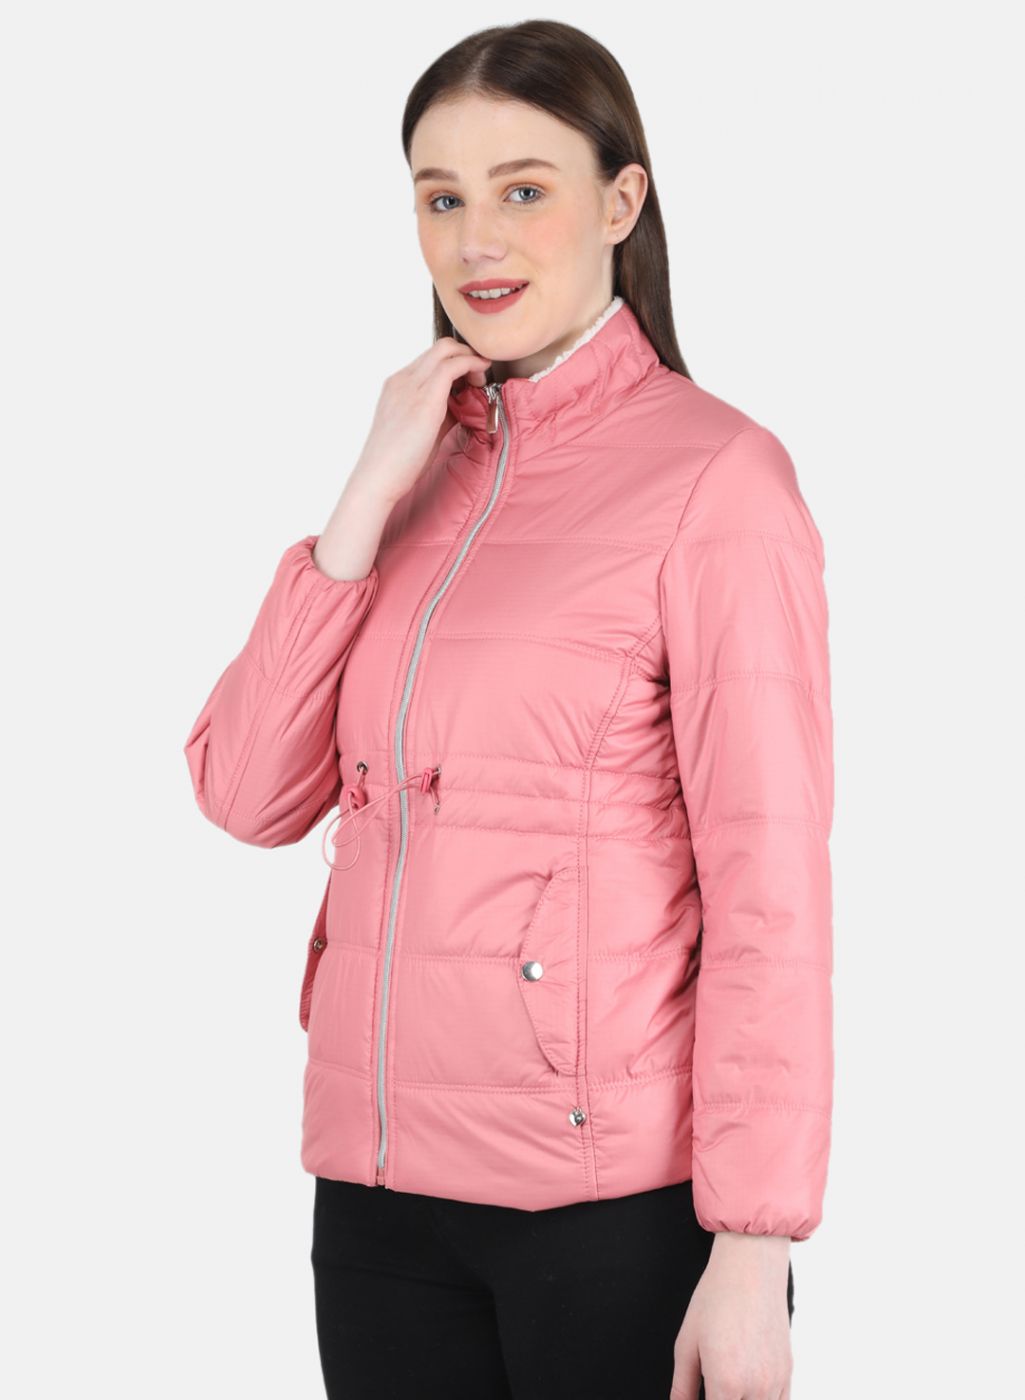 Ladies Jackets Manufacturer,Ladies Jackets Supplier and Exporter from  Ludhiana India